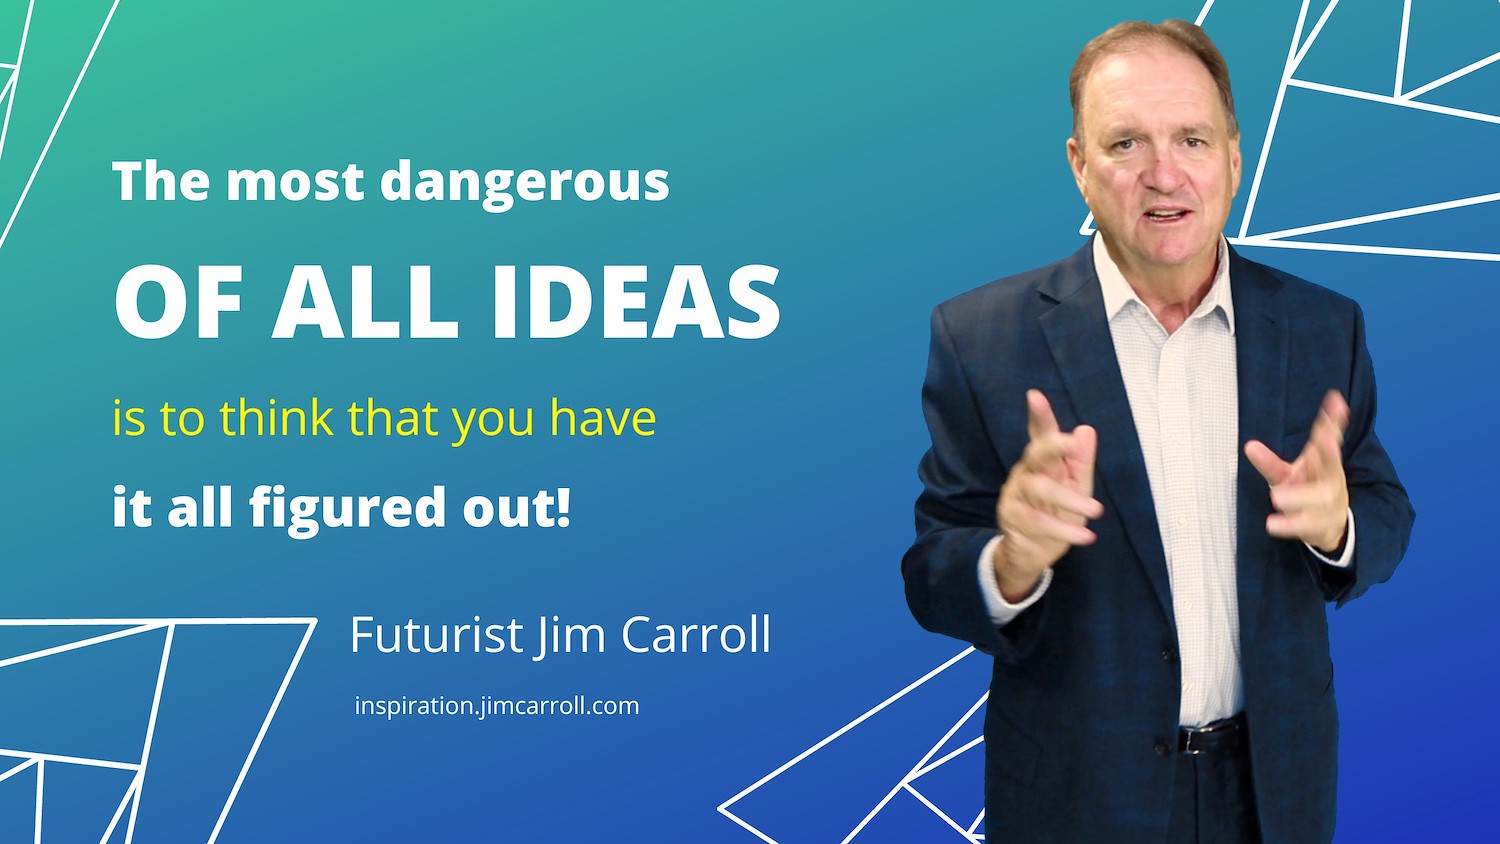 "The most dangerous of all ideas is to think that you have it all figured out!" - Futurist Jim Carroll